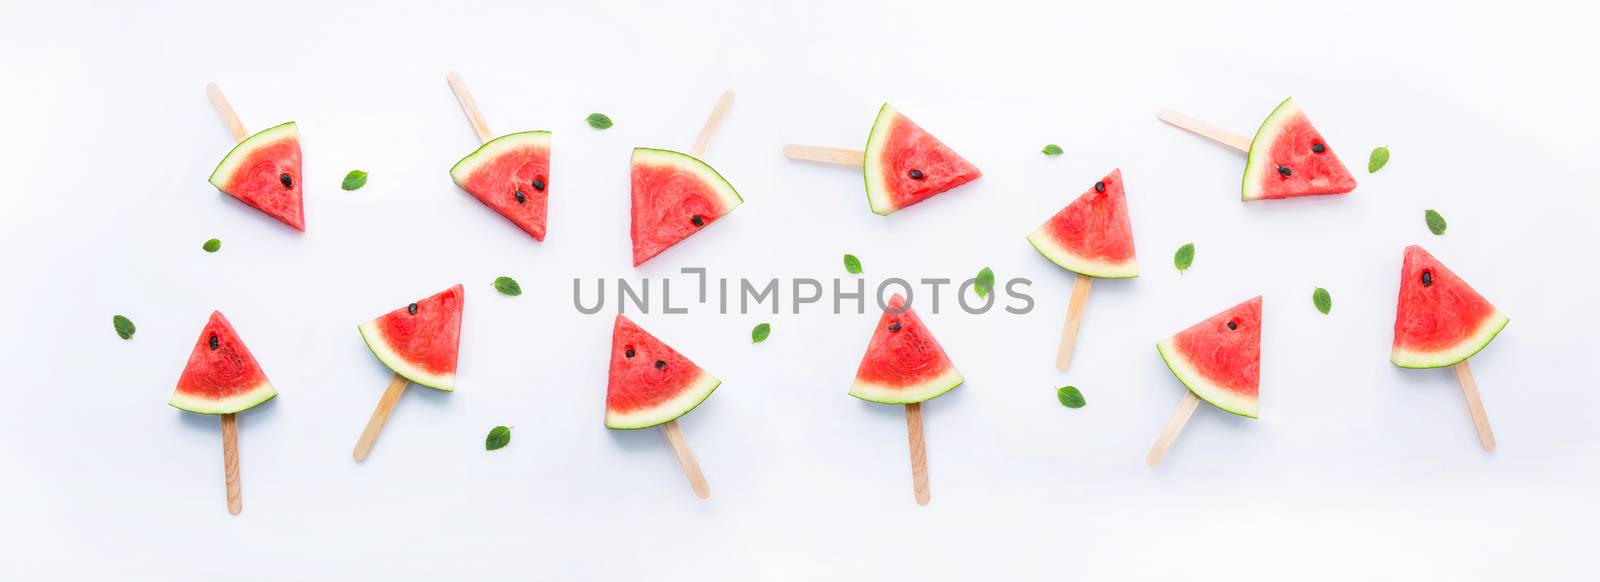 Watermelon slice popsicles on white background by Bowonpat